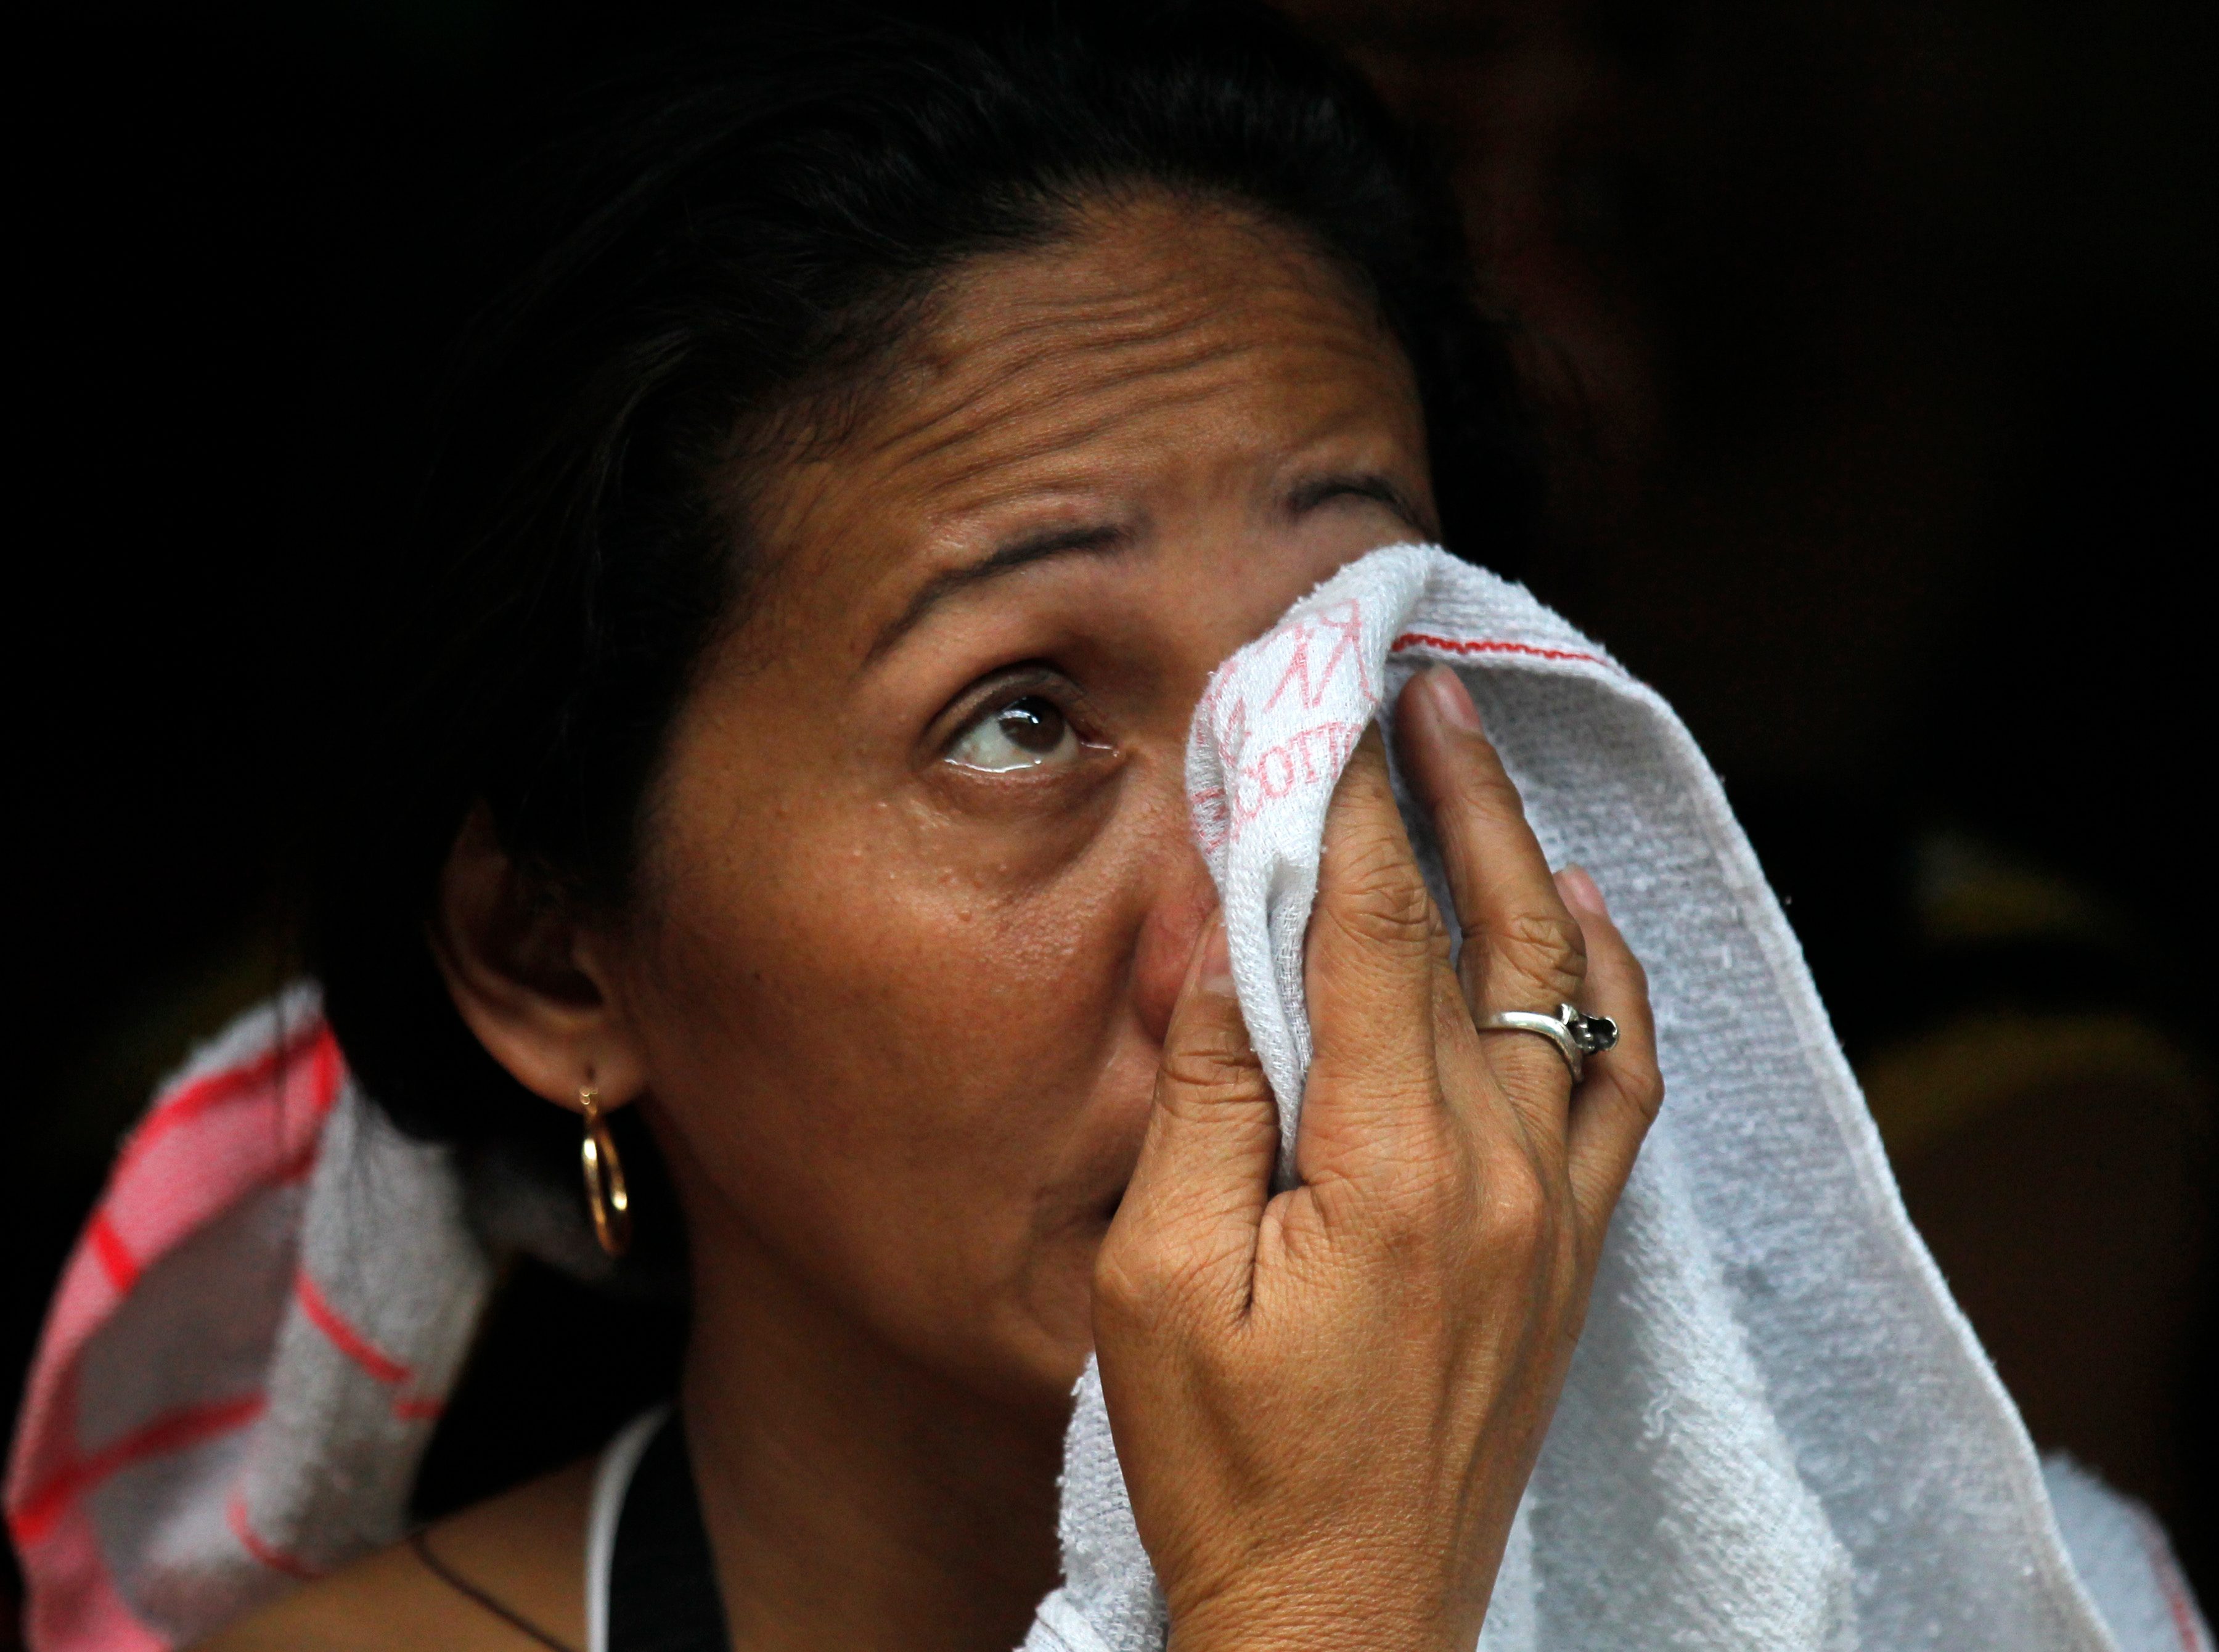 epa04745822 A Filipino relative of a missing factory worker wipes her tears following a fire at a warehouse in Valenzuela city, east of Manila, Philippines, 13 May 2015. Five persons were killed after they were trapped inside a burning rubber slipper factory in Valenzuela City, according to arson investigators from the Bureau of Fire Protection (BFP). EPA/FRANCIS R. MALASIG 